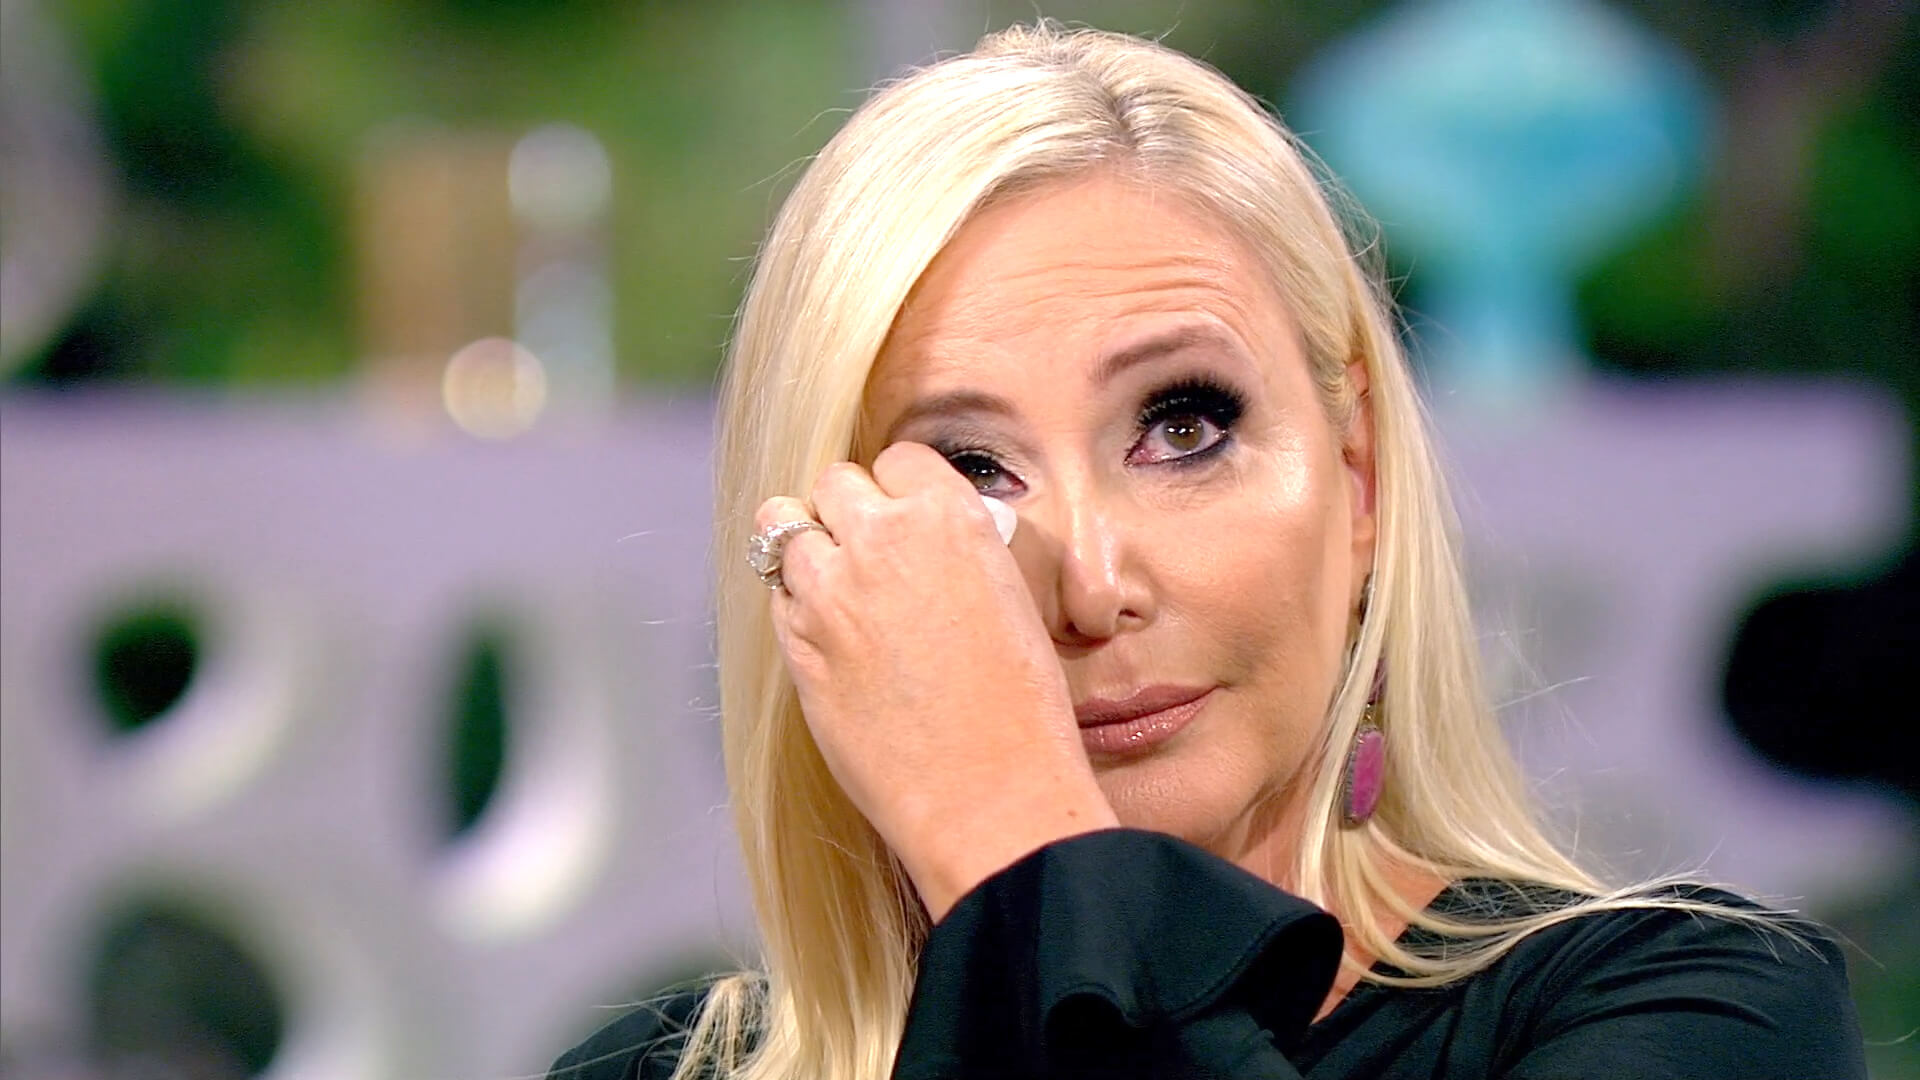 Tamra Judge Fights Back Tears Discussing Shannon Beador’s DUI Arrest: ‘I Feel Sick to My Stomach’